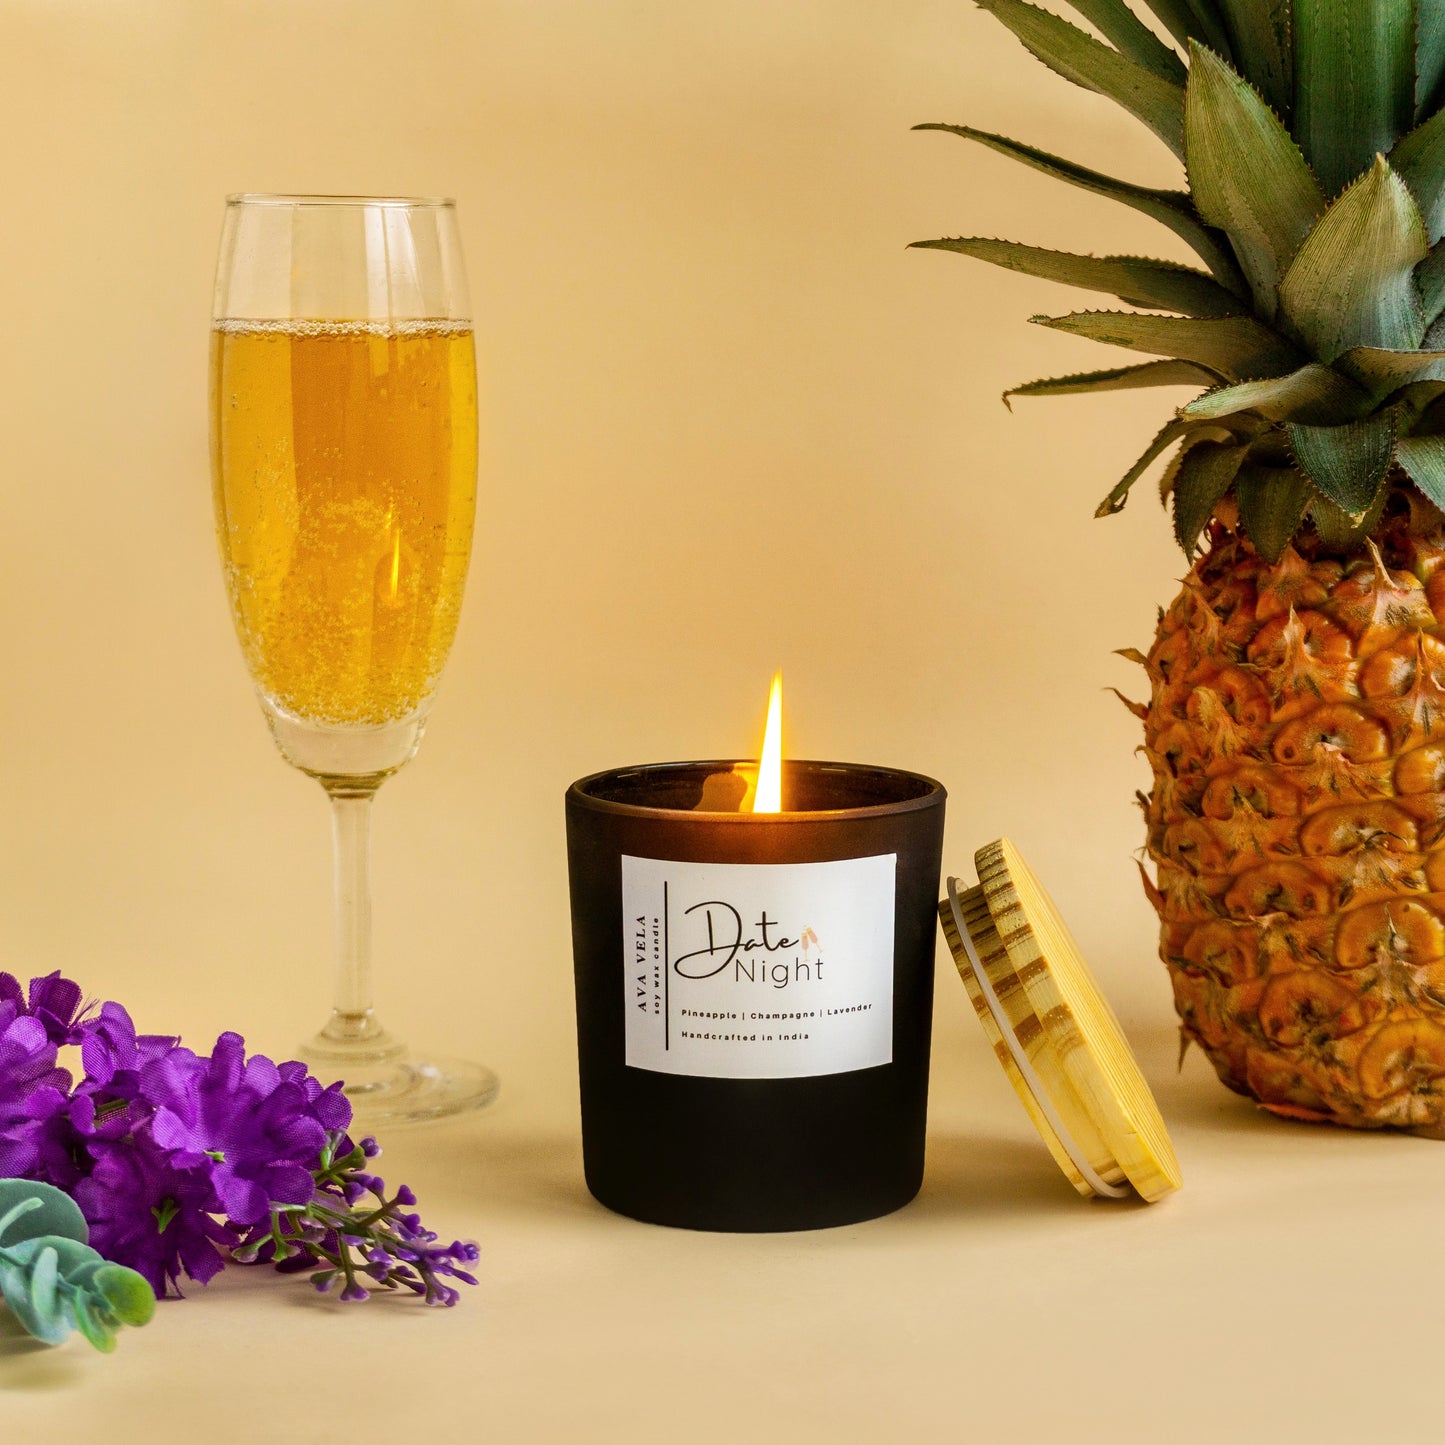 Date Night (Champagne + Lavender + Pineapple) Soy Wax Scented Candle 40Hrs Burn Time